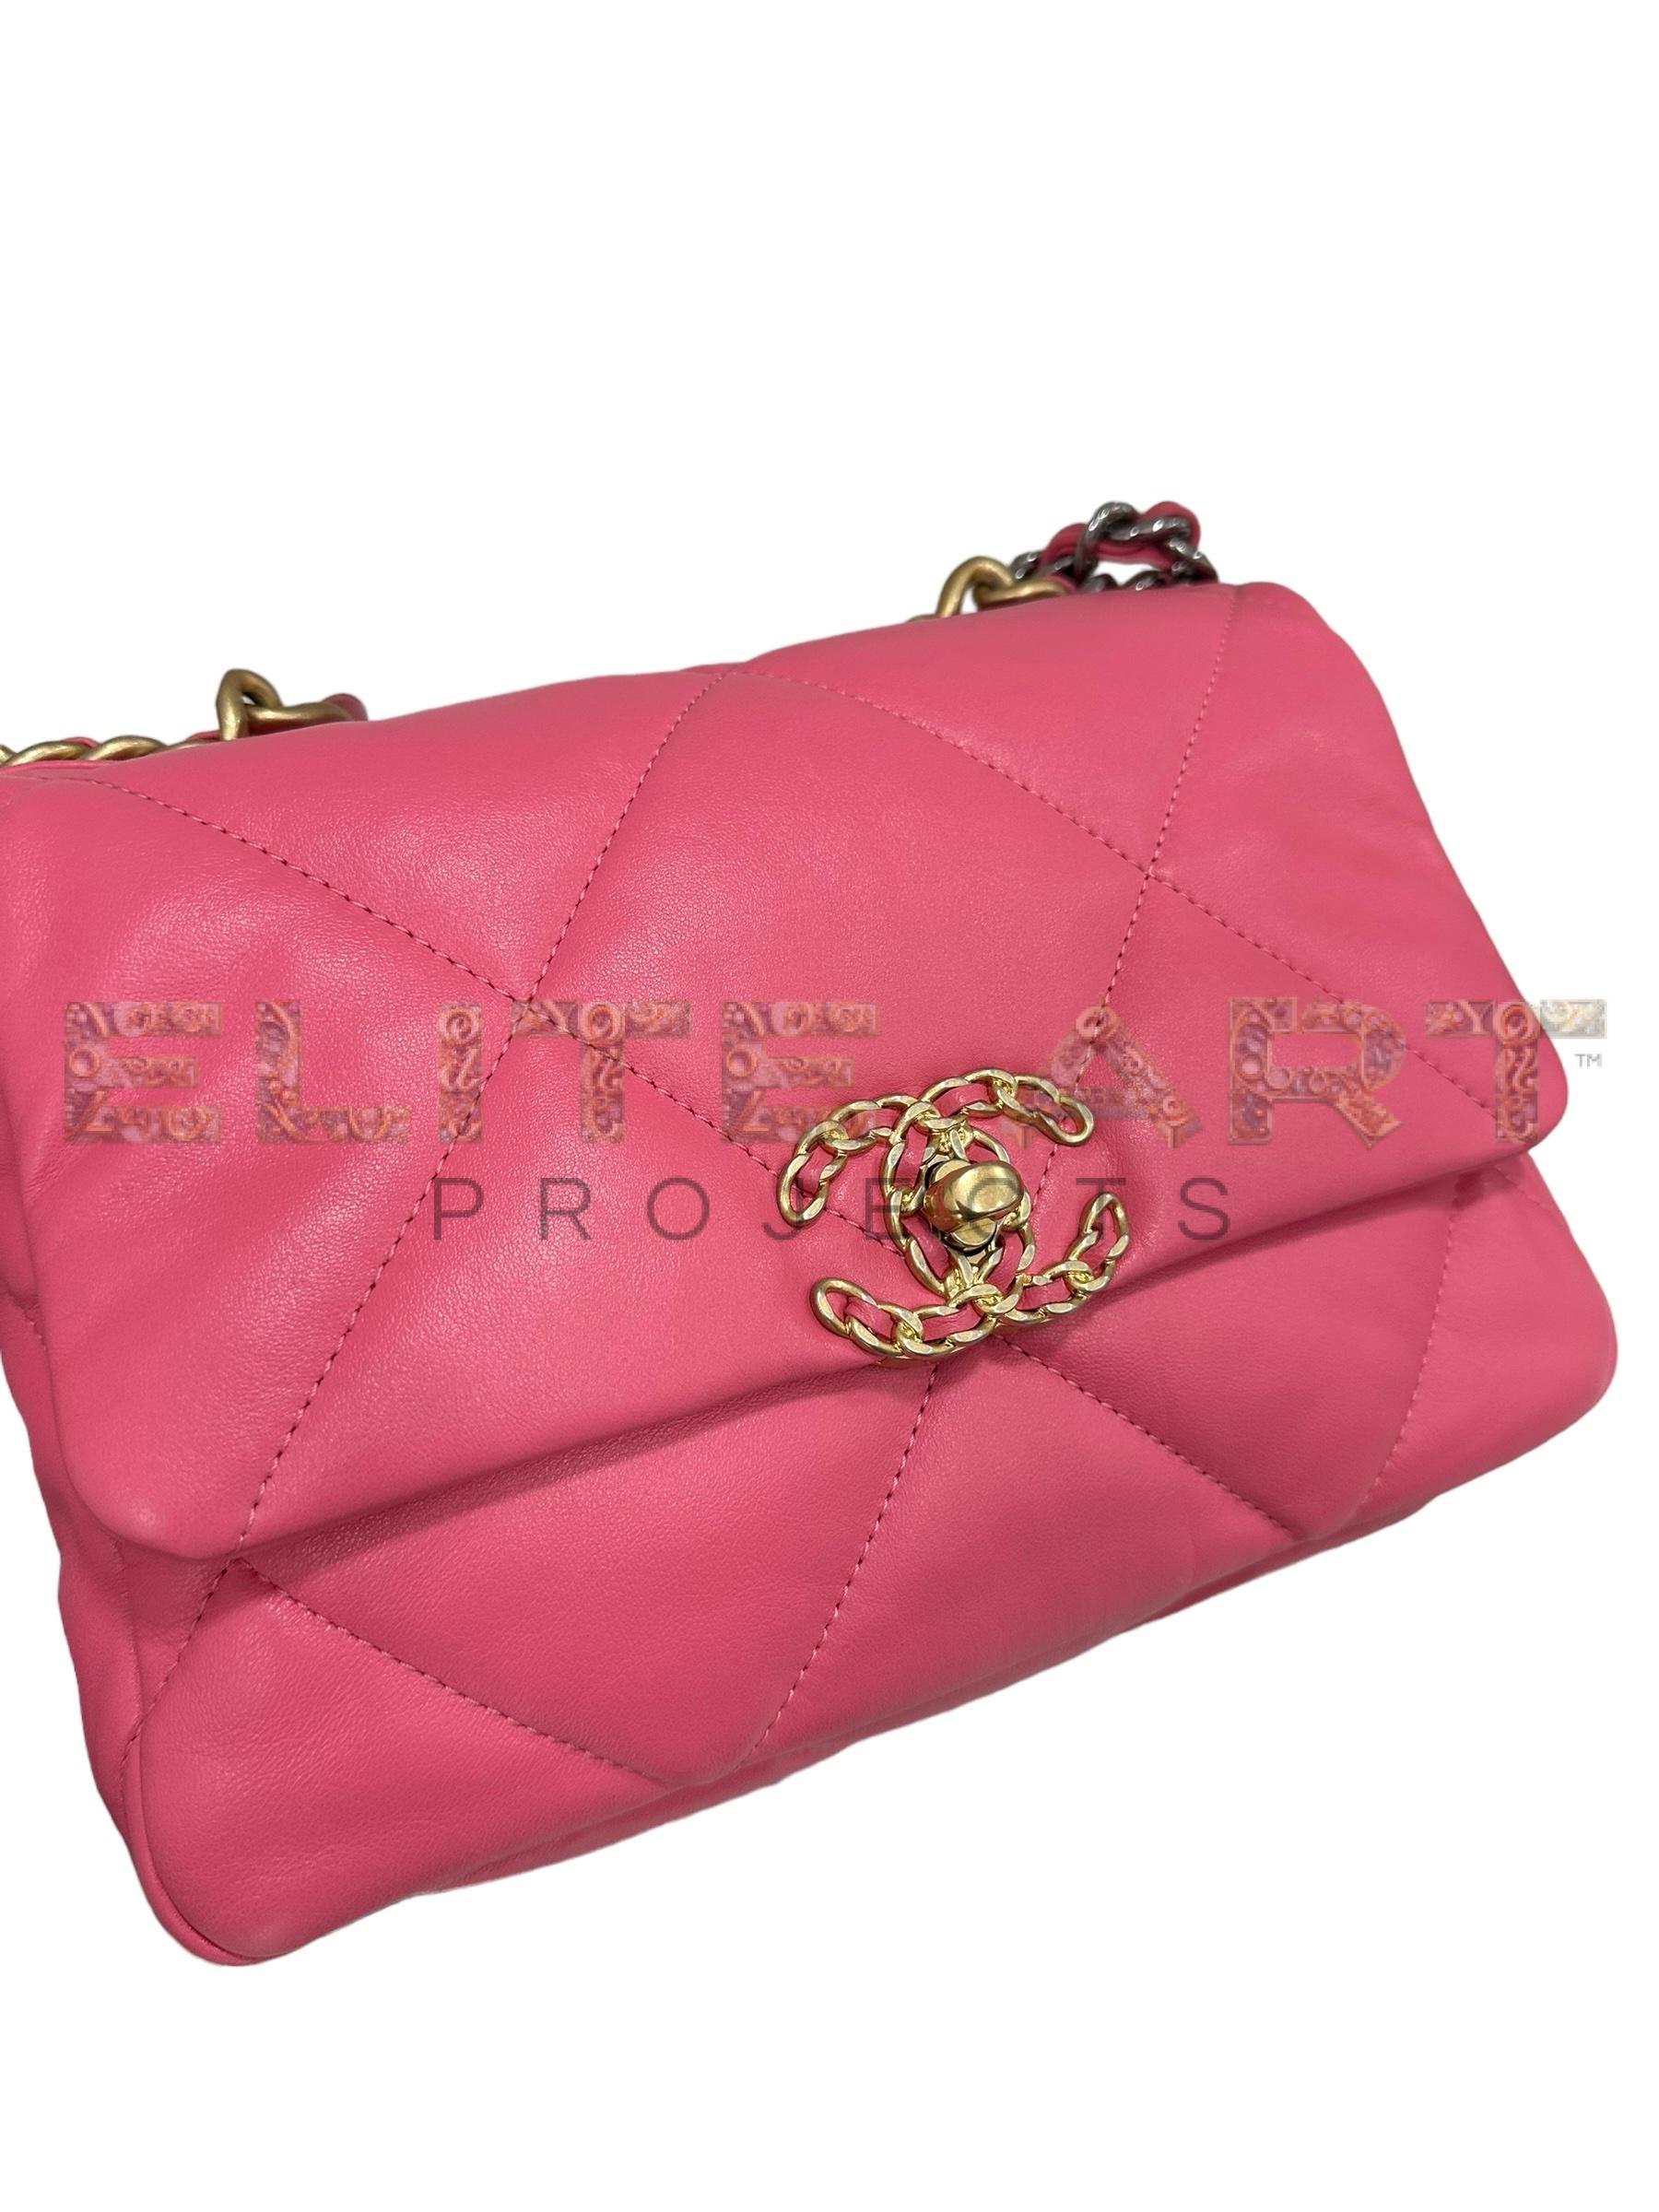 19, small, pink leather, bicolor hardware, elegance